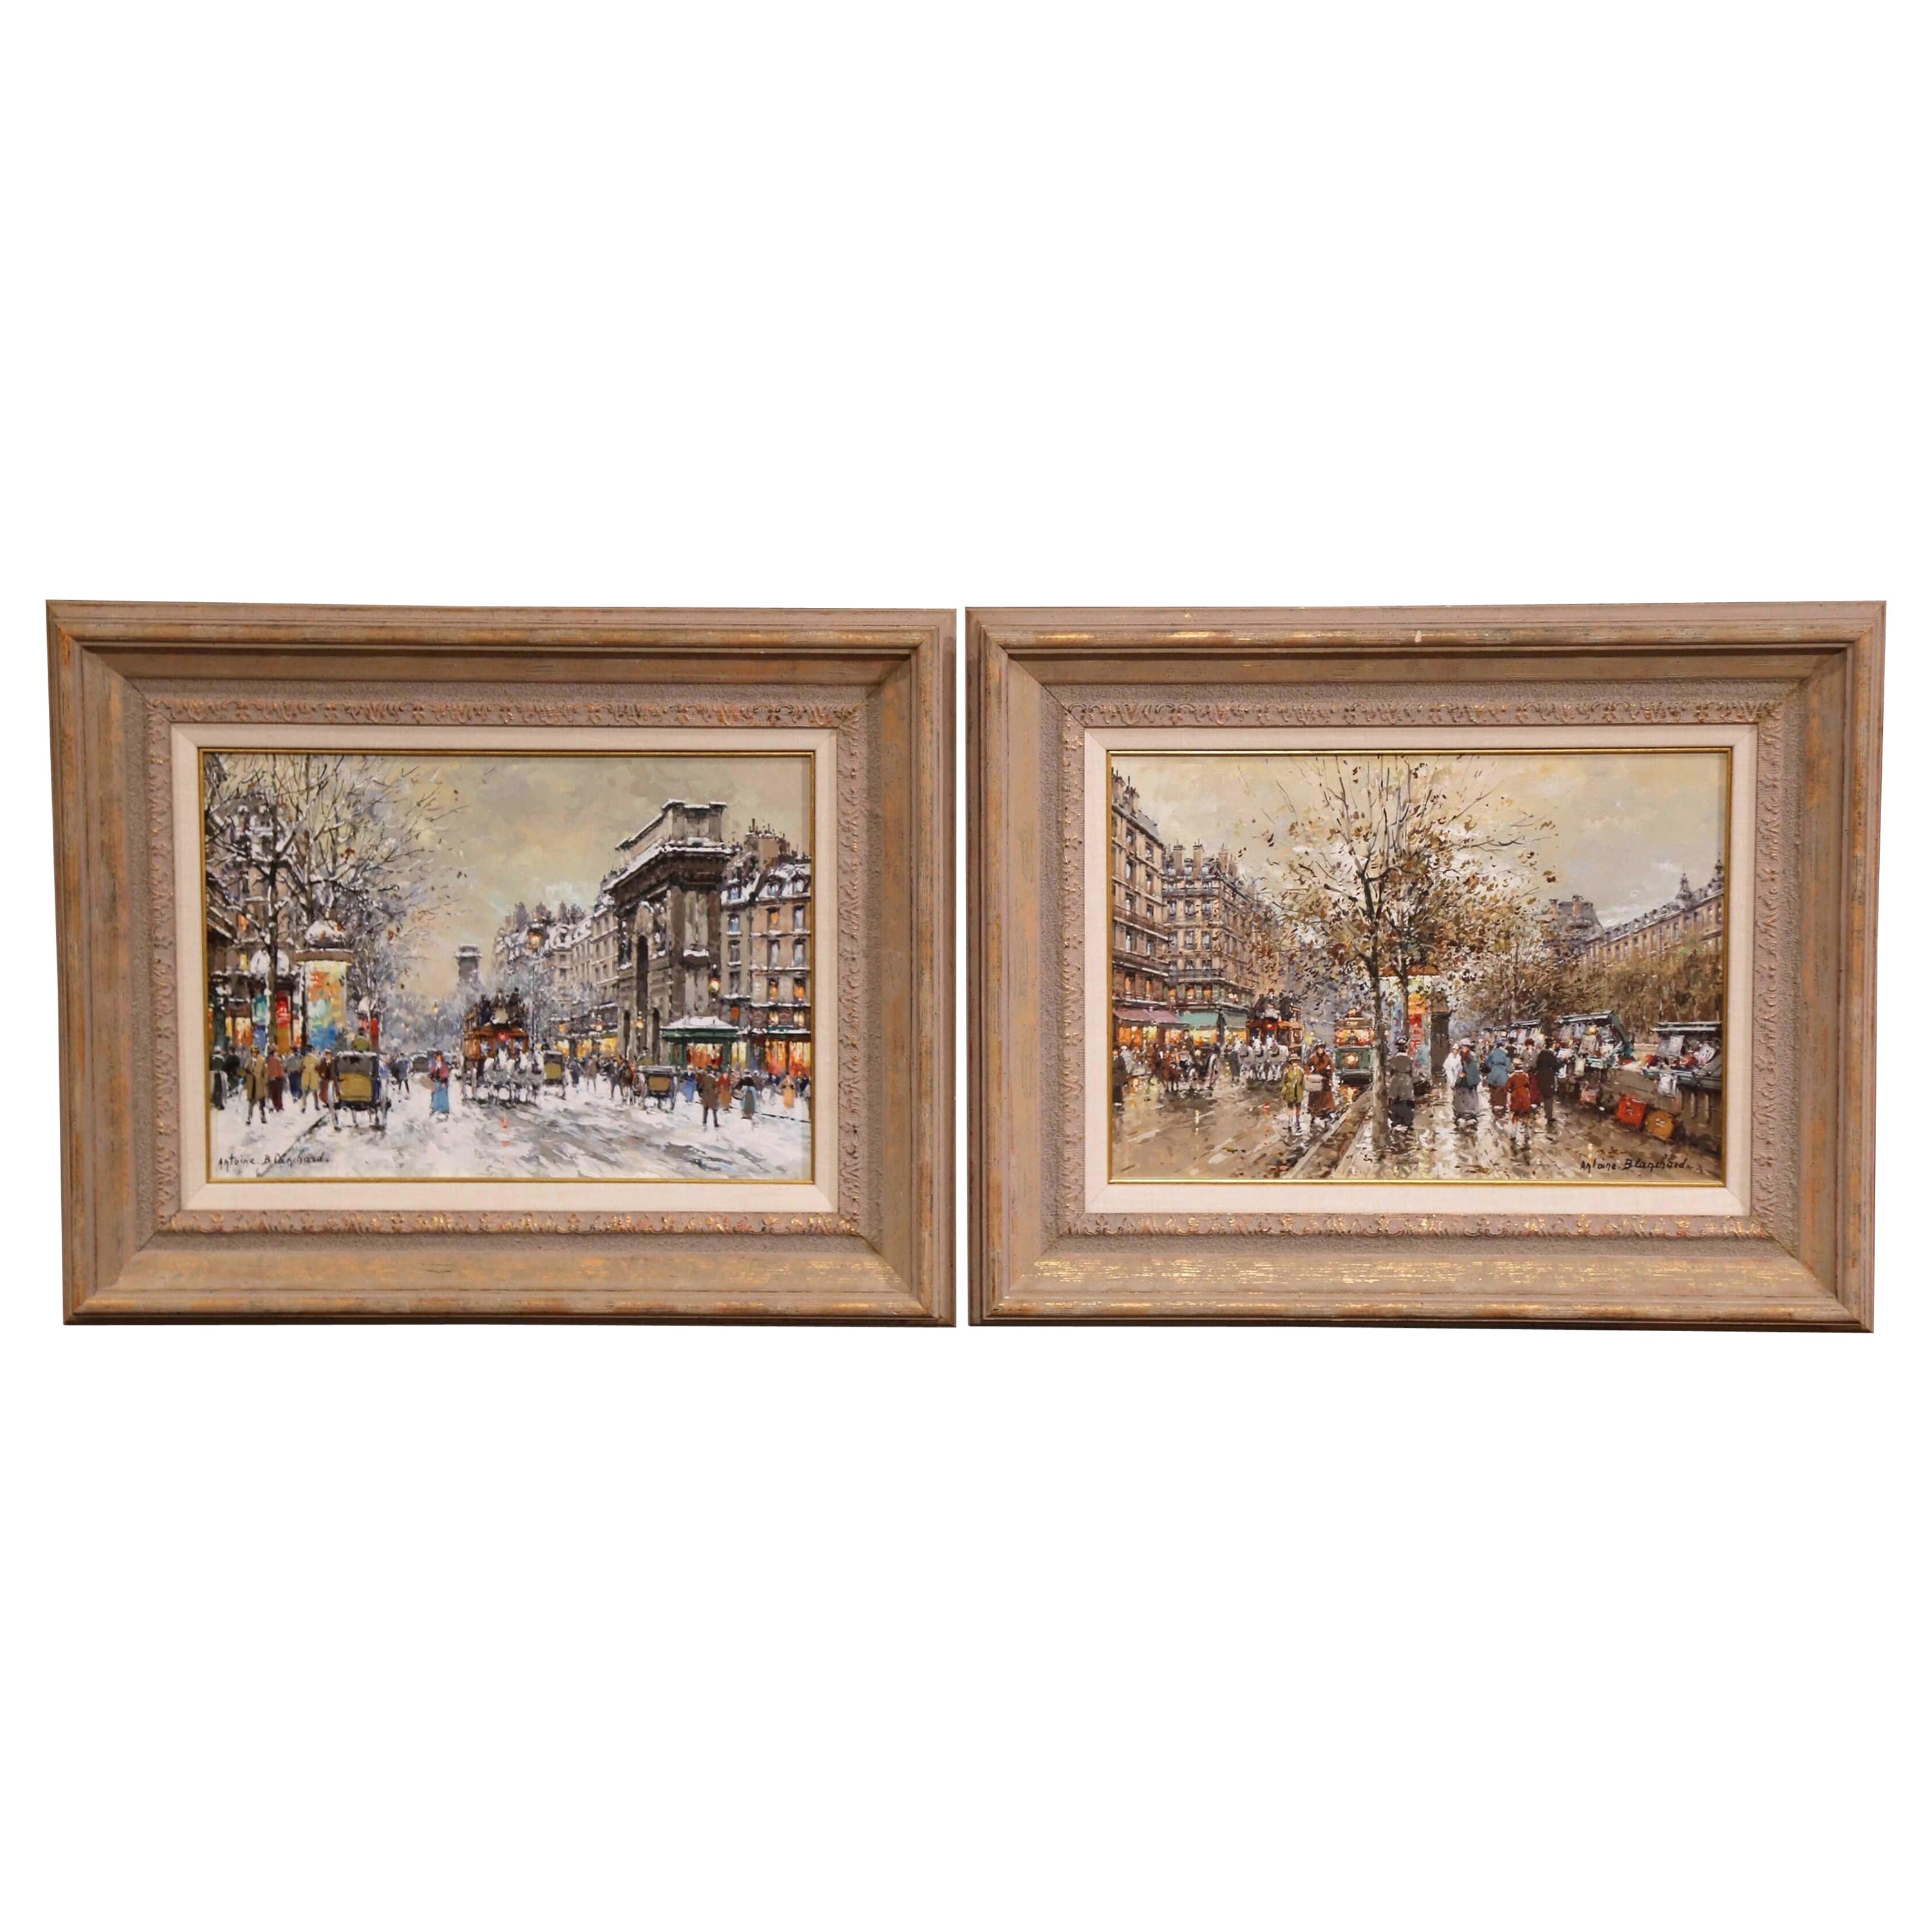 Pair of Mid-Century Oil on Canvas Parisian Scenes Paintings Signed A. Blanchard